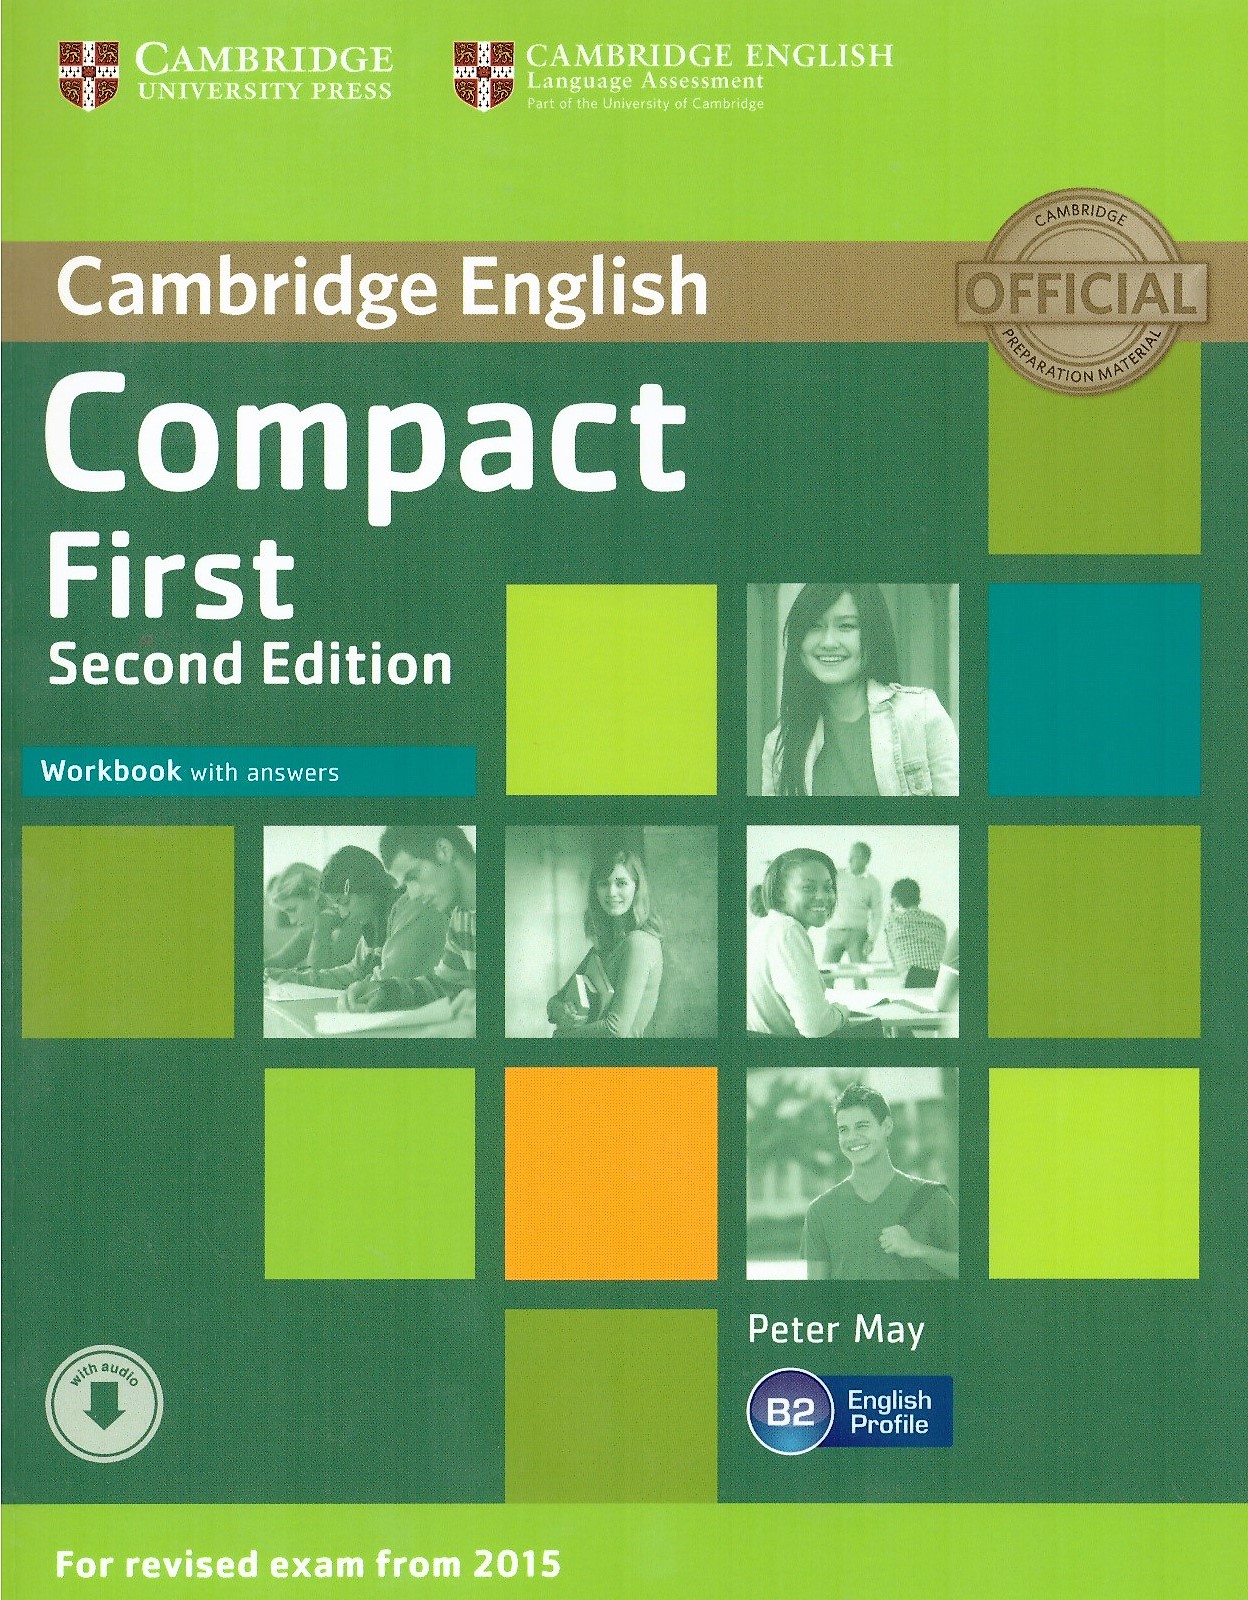 Compact First (Second Edition) Workbook + Audio + Answers / Рабочая тетрадь + ответы